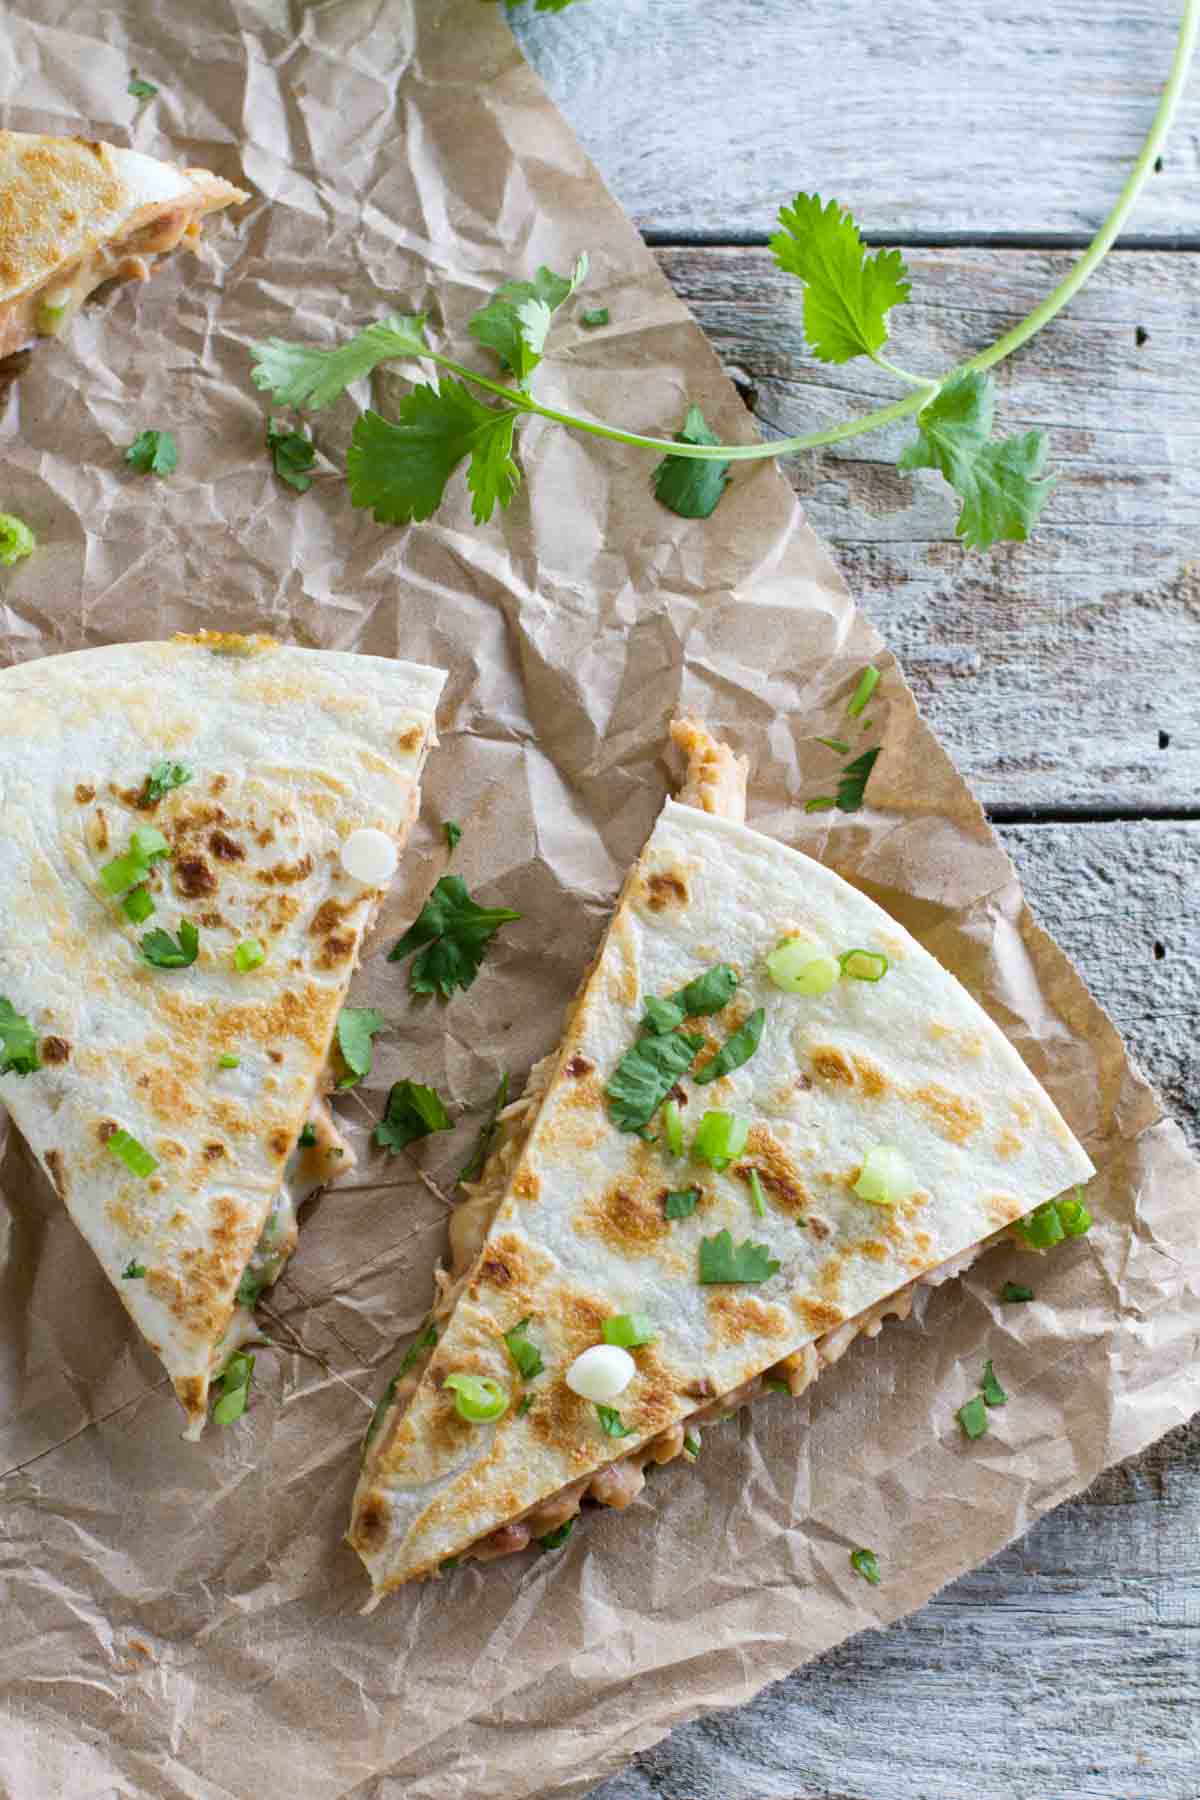 Chicken quesadilla with refried beans cut into wedges with cilantro and green onion on top.